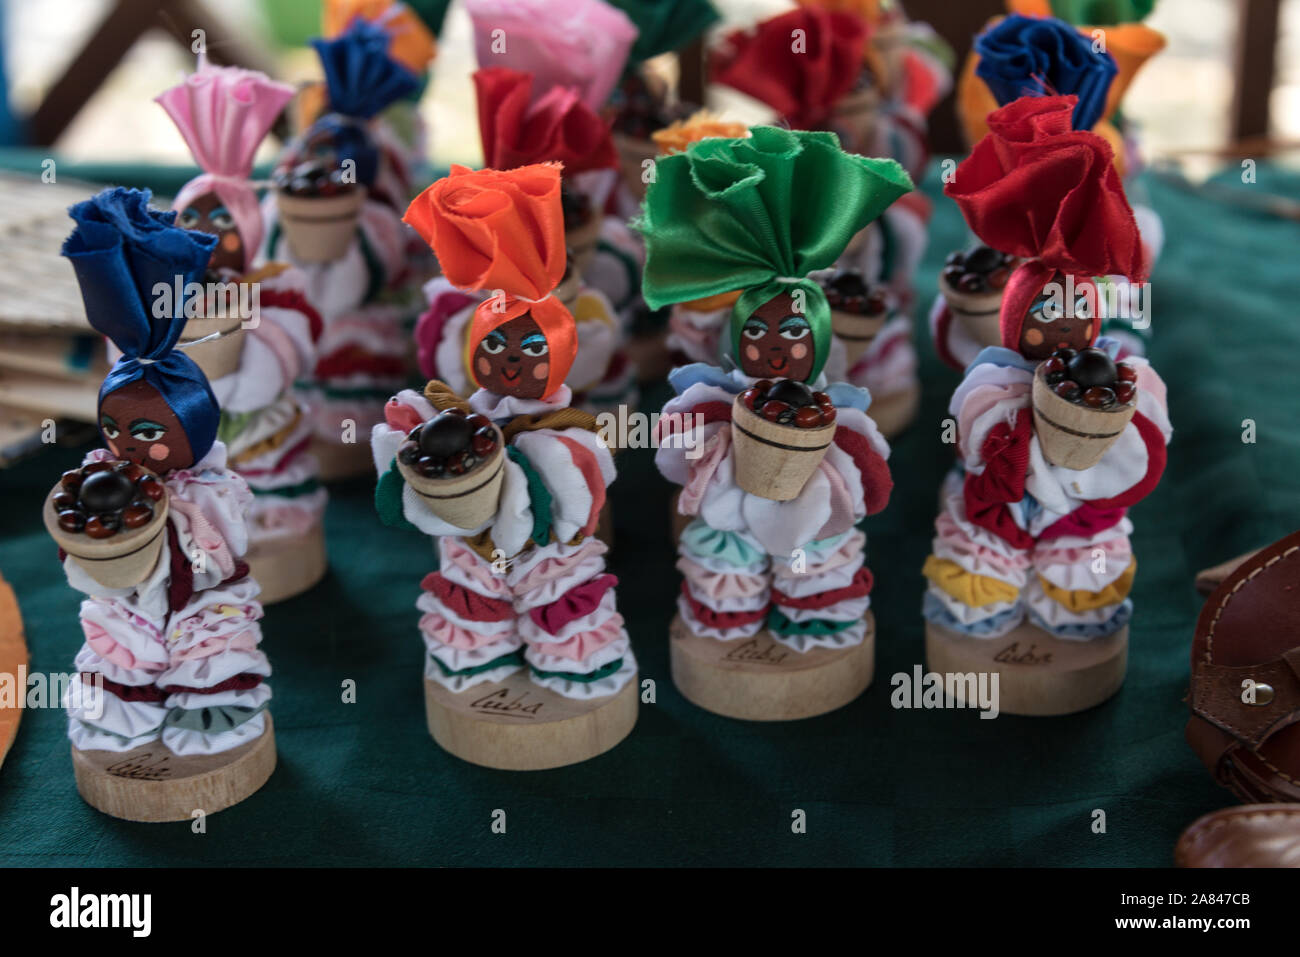 Cuban Doll High Resolution Stock Photography and Images - Alamy